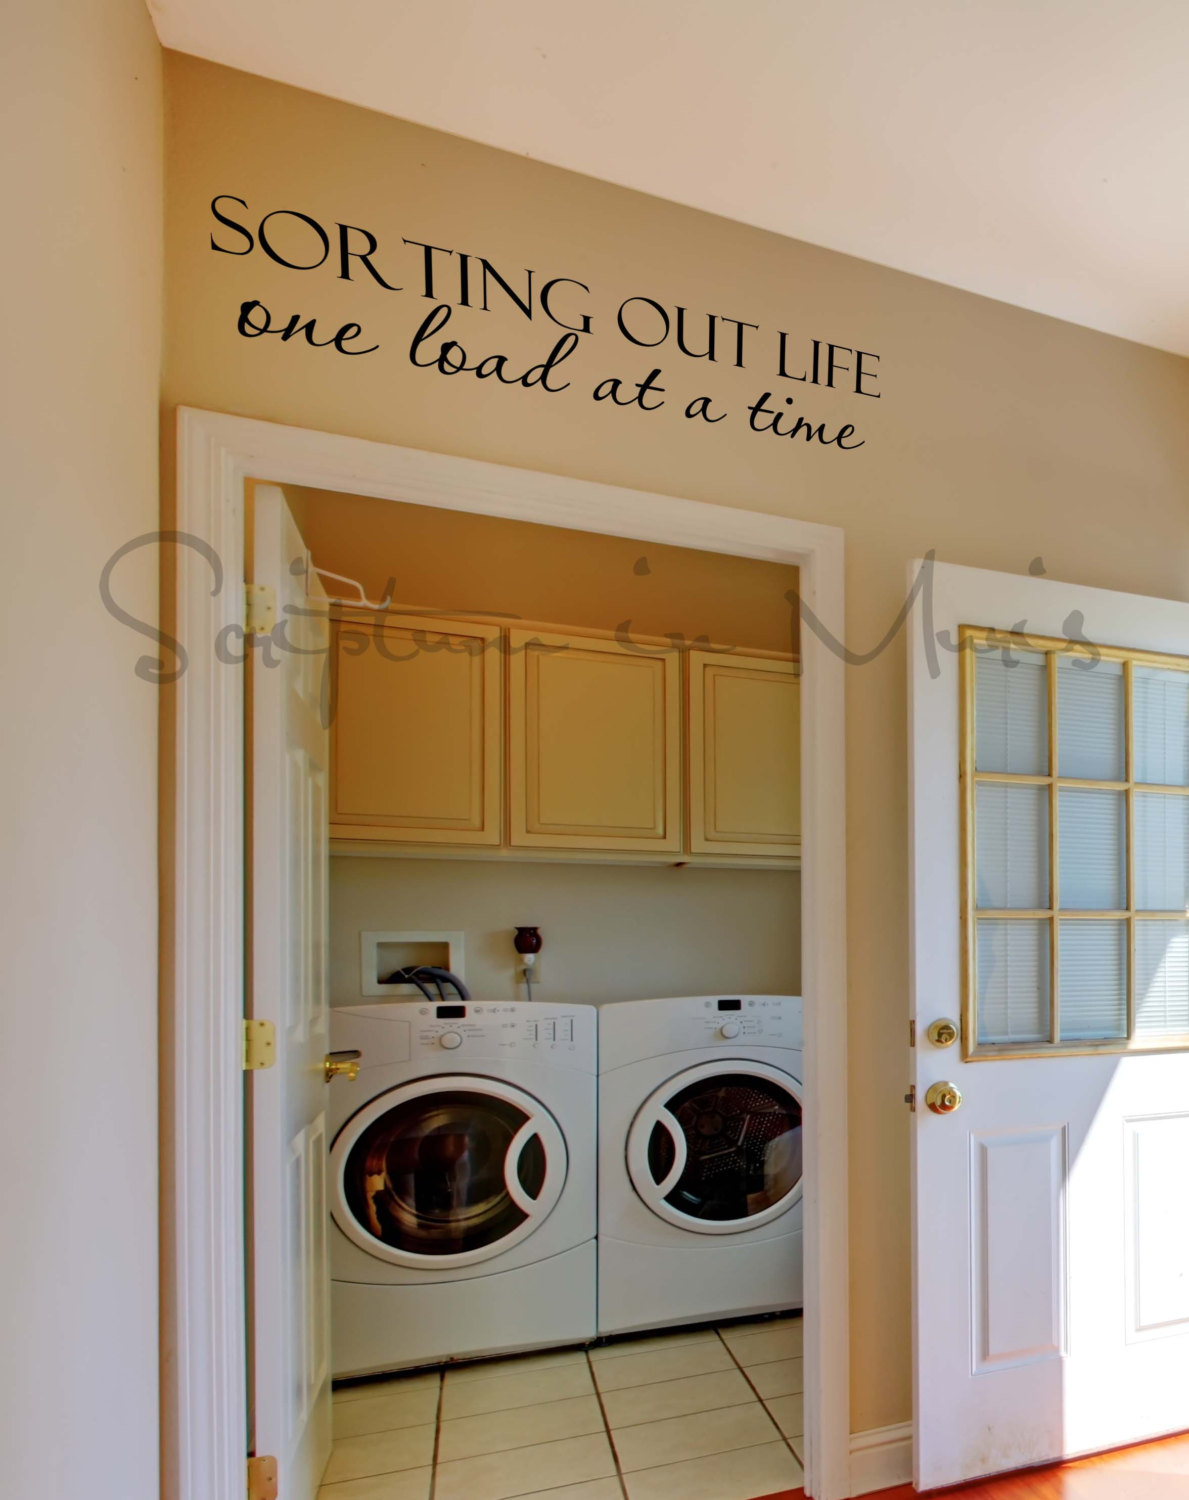 Laundry Room Sorting Out Life One Load At A Time Vinyl Decal